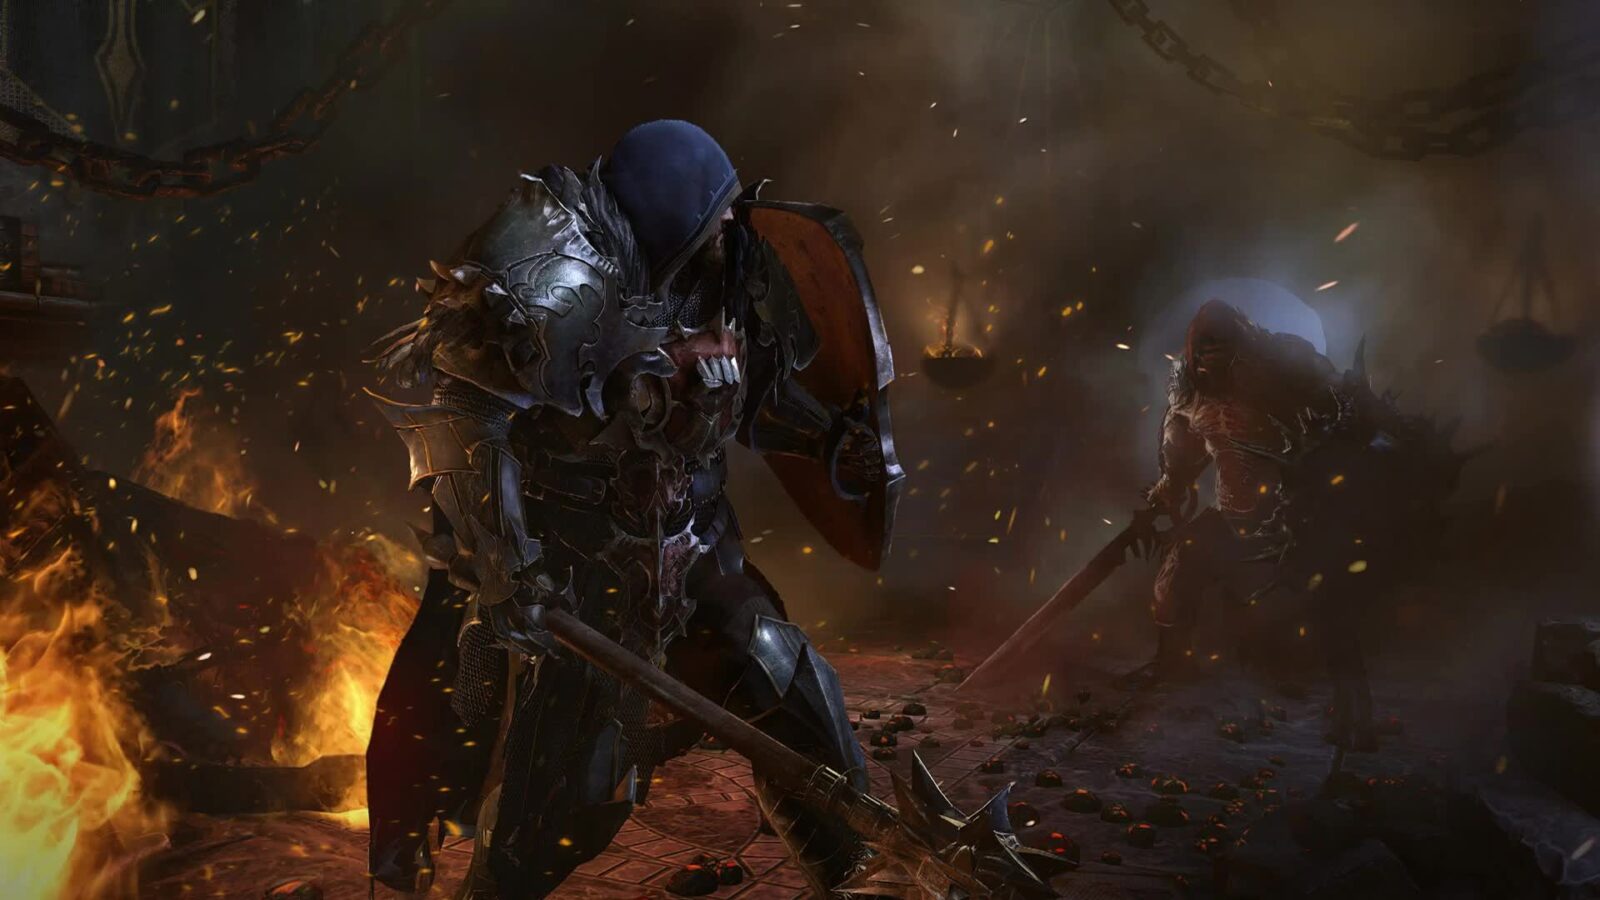 LiveWallpapers4Free.com | Lords Of The Fallen Flames - Free Animated Desktop Wallpaper